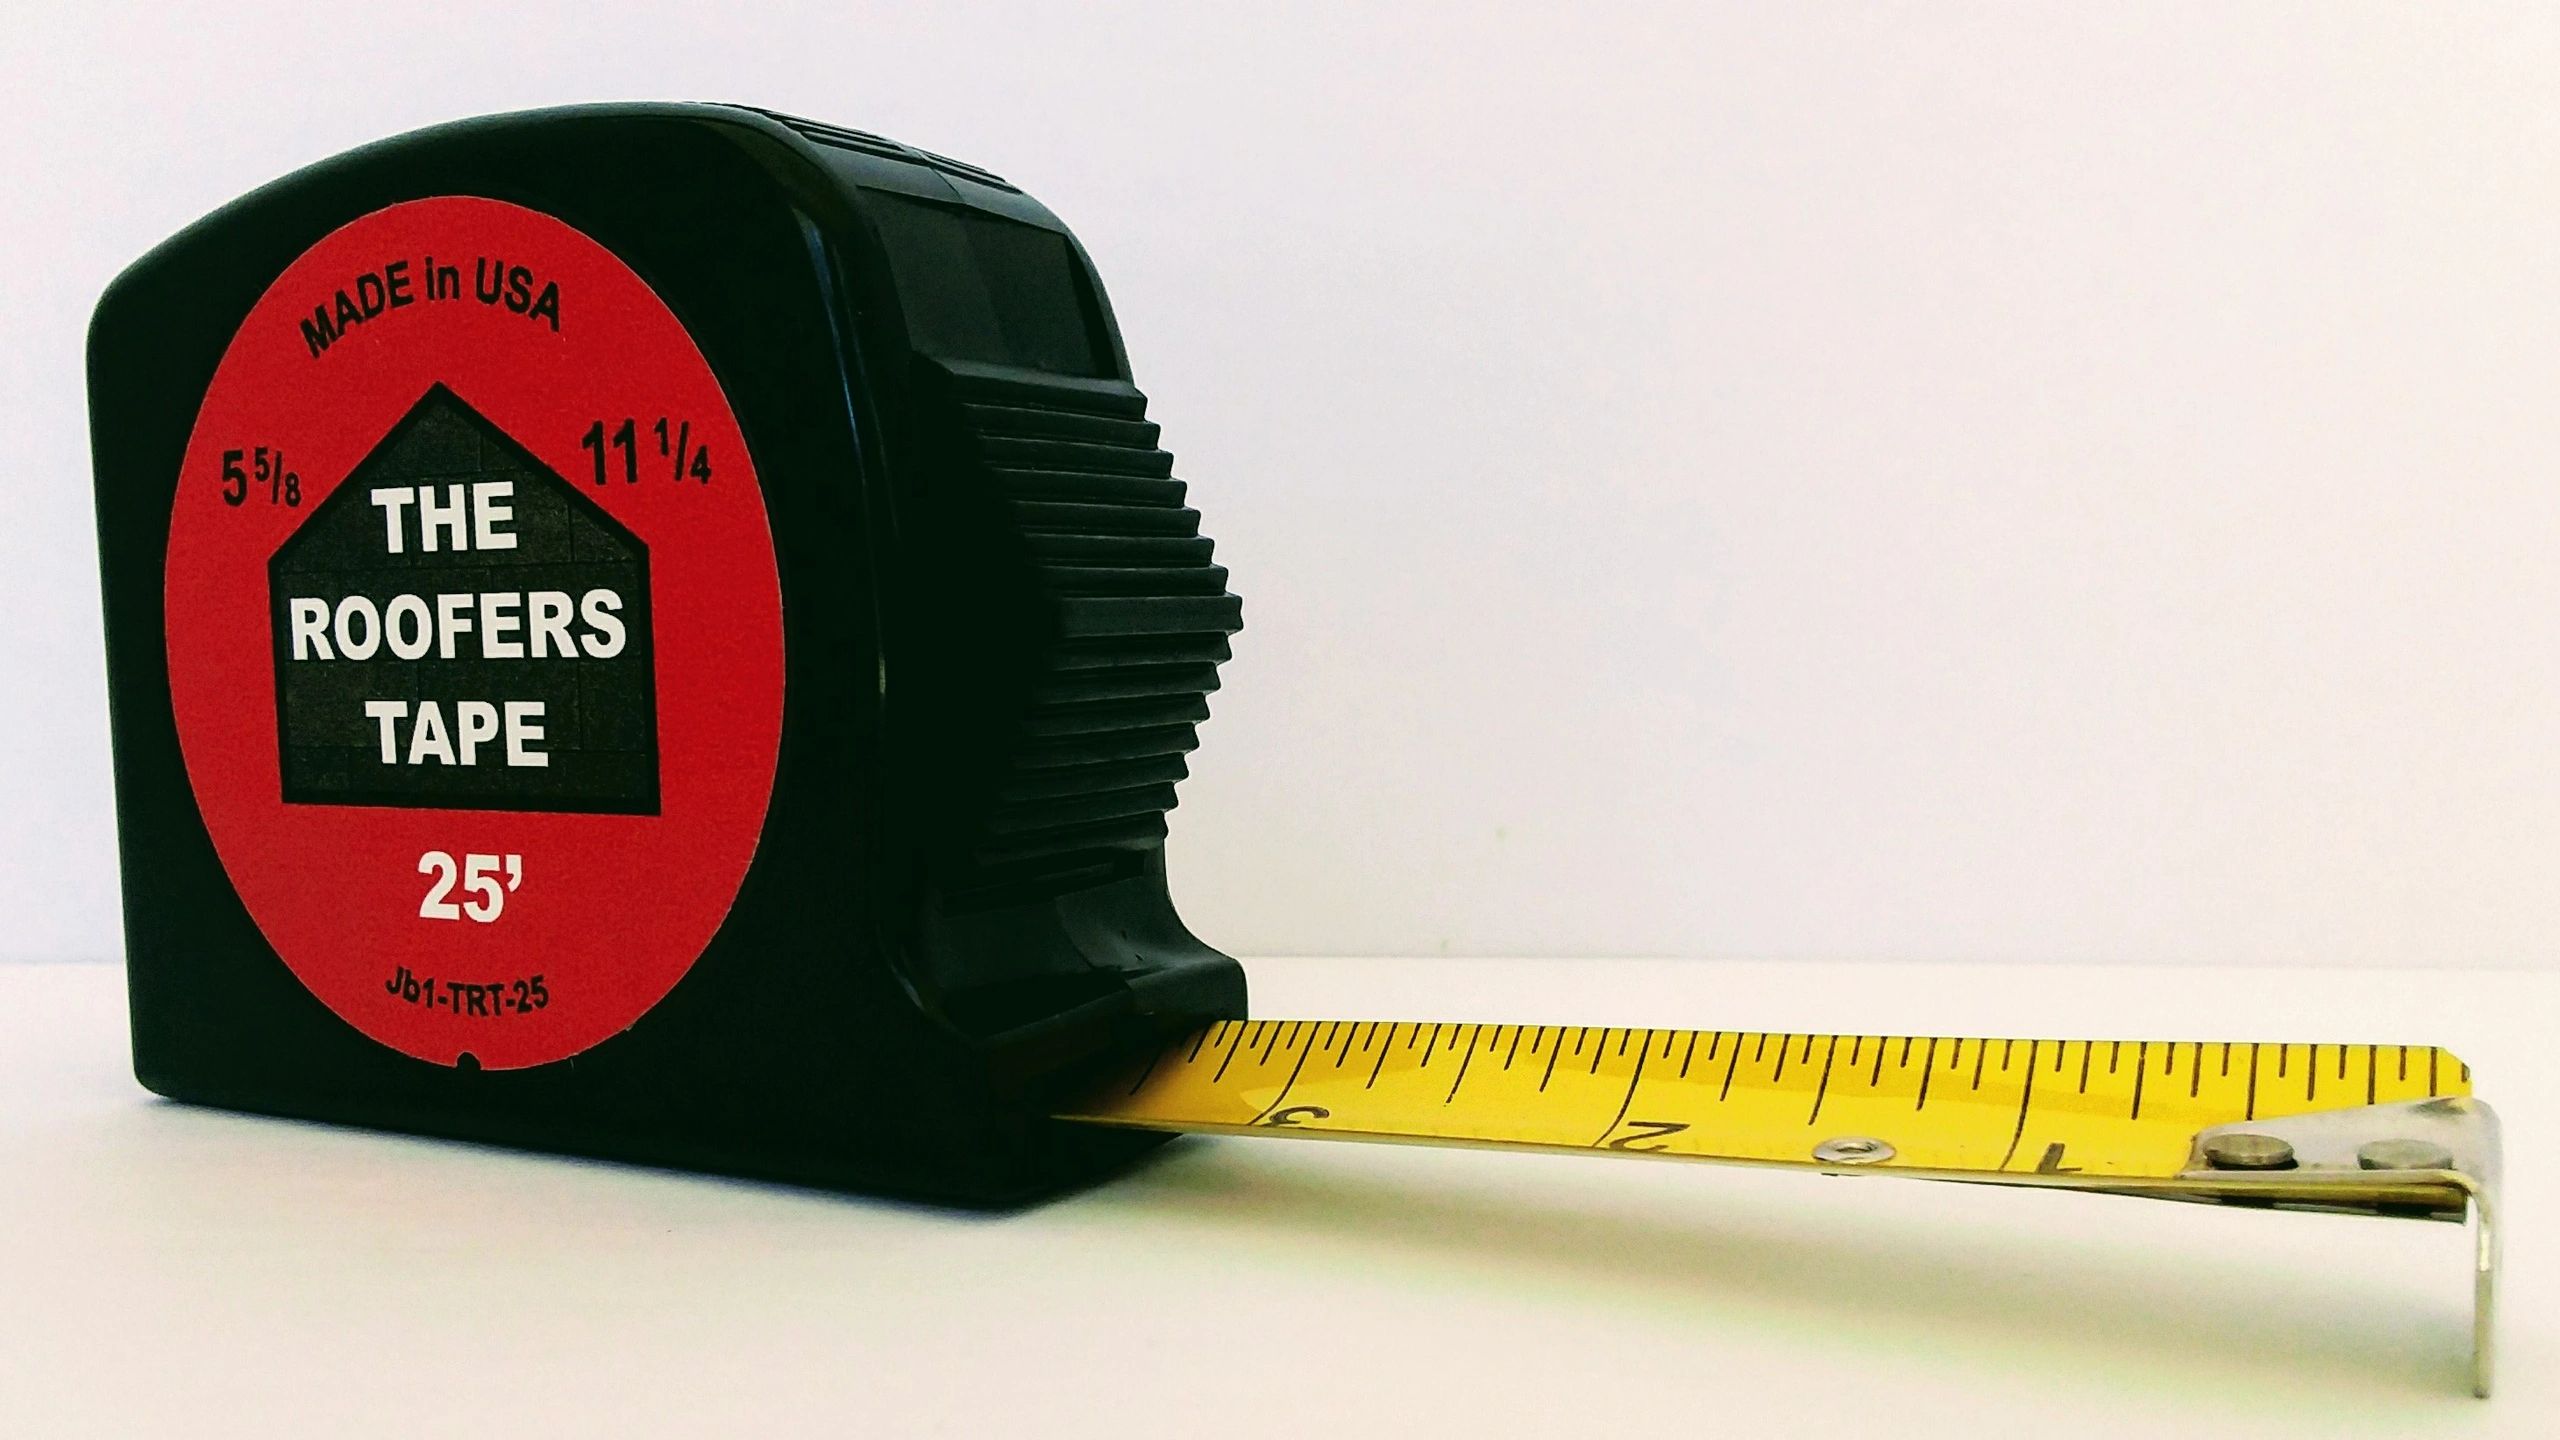 Roofers Tape is a tape measure for installation of 5-5/8 architectural shingles